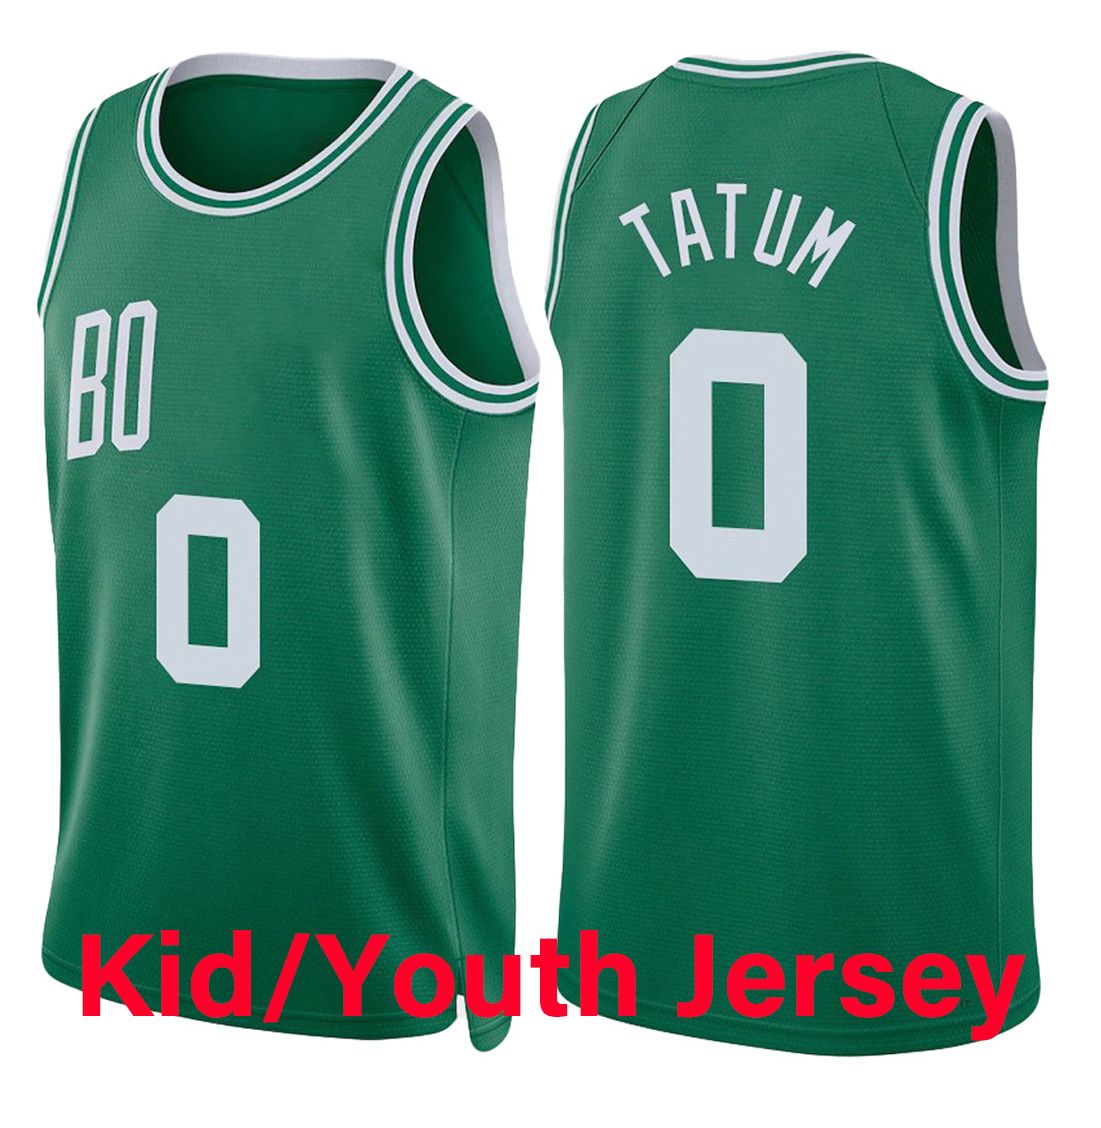 Youth/Kid Jersey